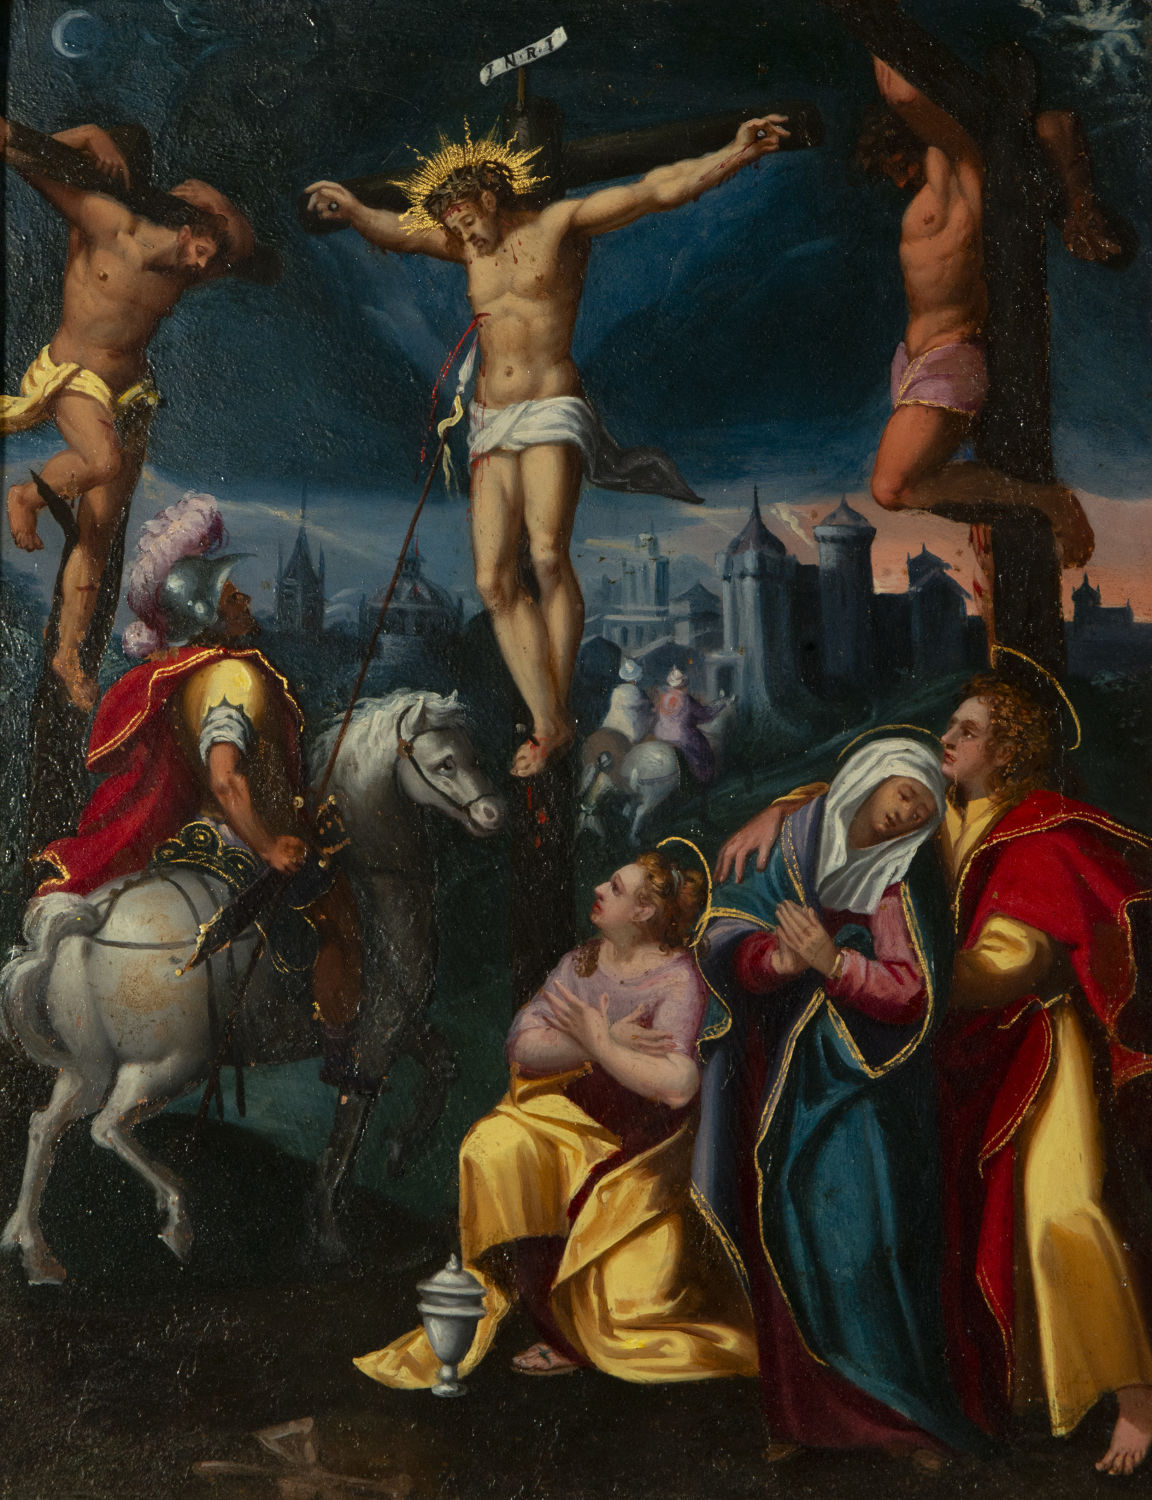 Attributed to Simon de Vos (Antwerp, 1603 – 1676) Christ on the Cross, oil on copper from the 17th c - Image 2 of 6